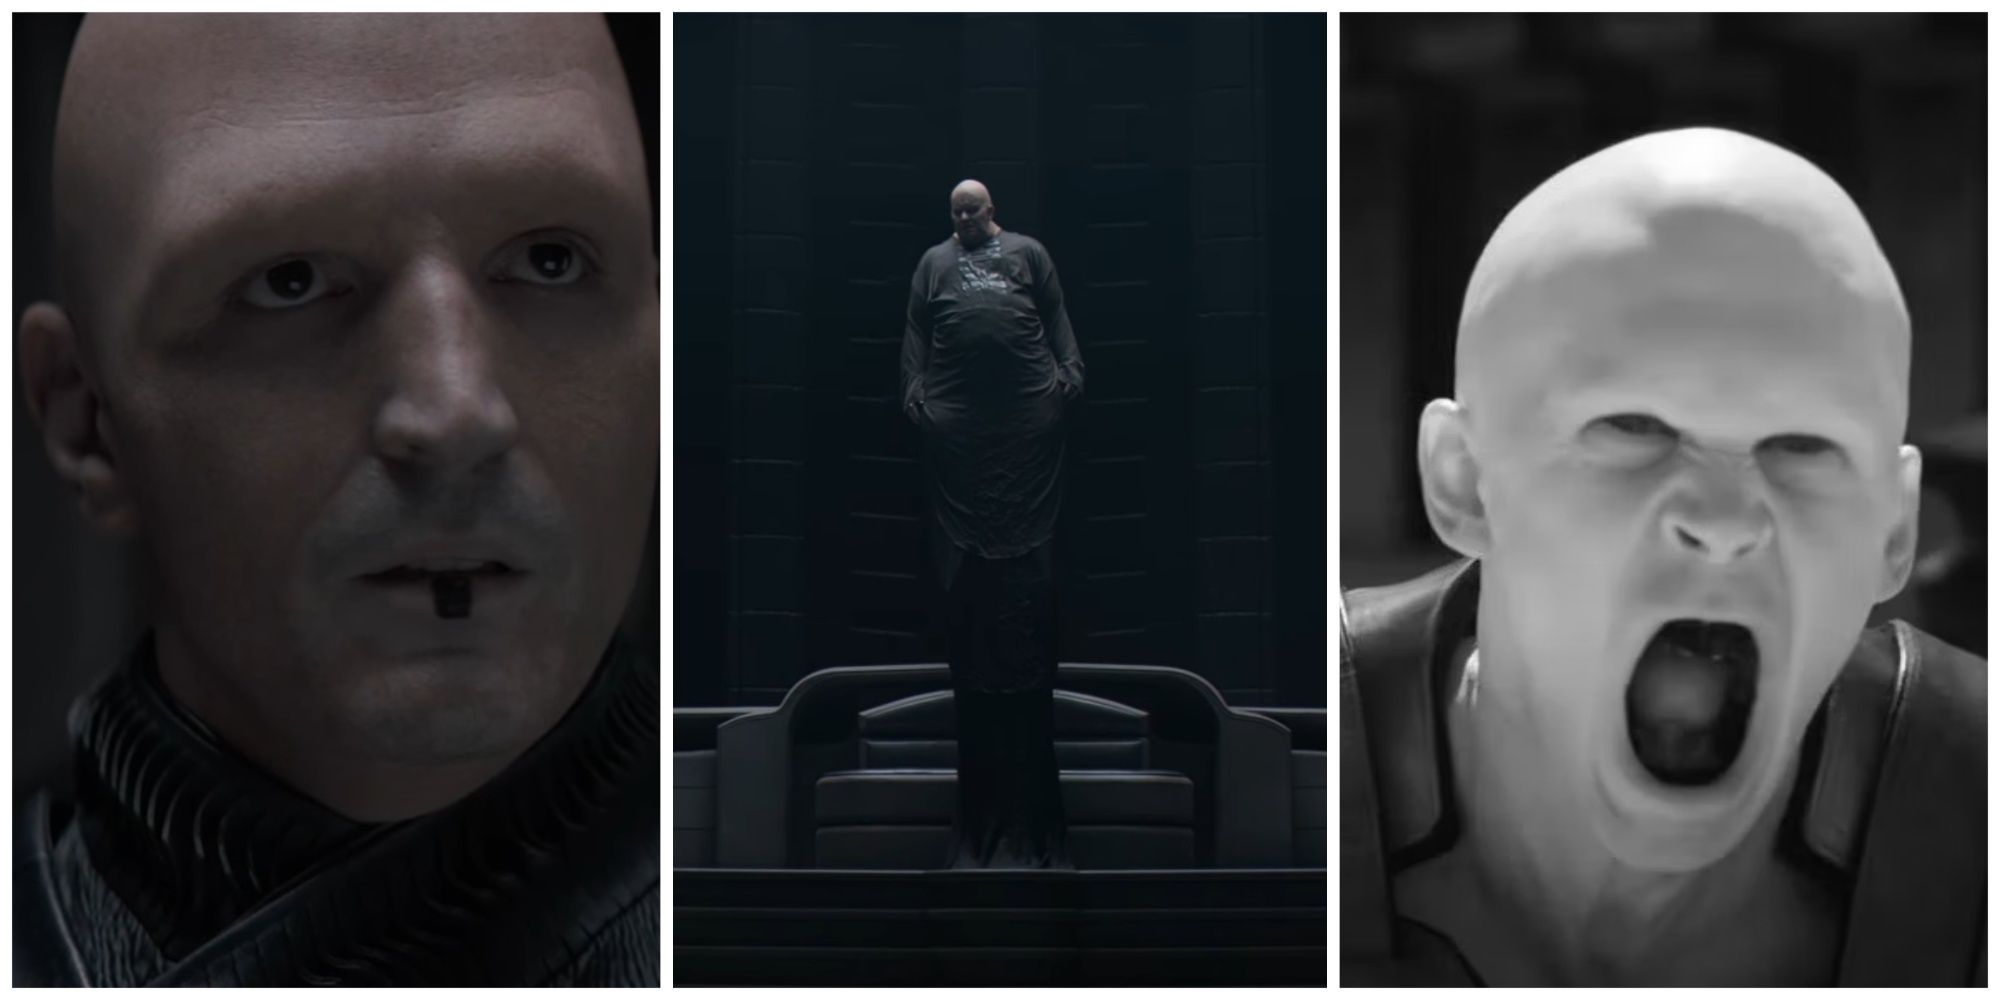 Split image showing three Harkonnens from Dune (2021): Peter de Vries, the Baron, and Feyd-Rautha.